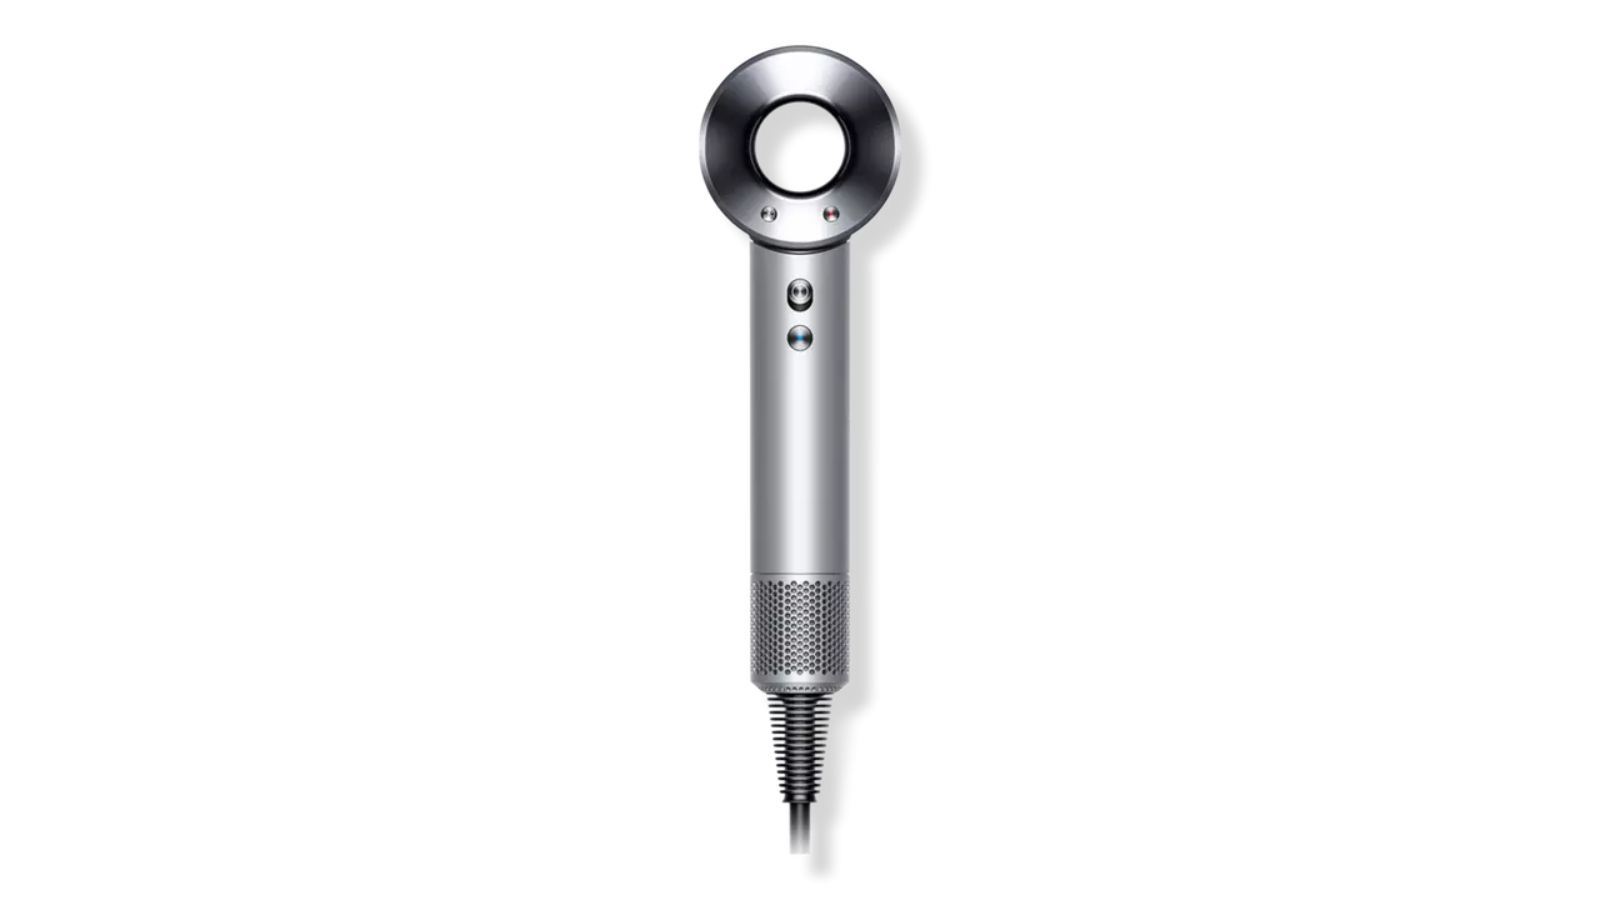 dyson supersonic hair dryer designed to guard hair from excessive heat damage